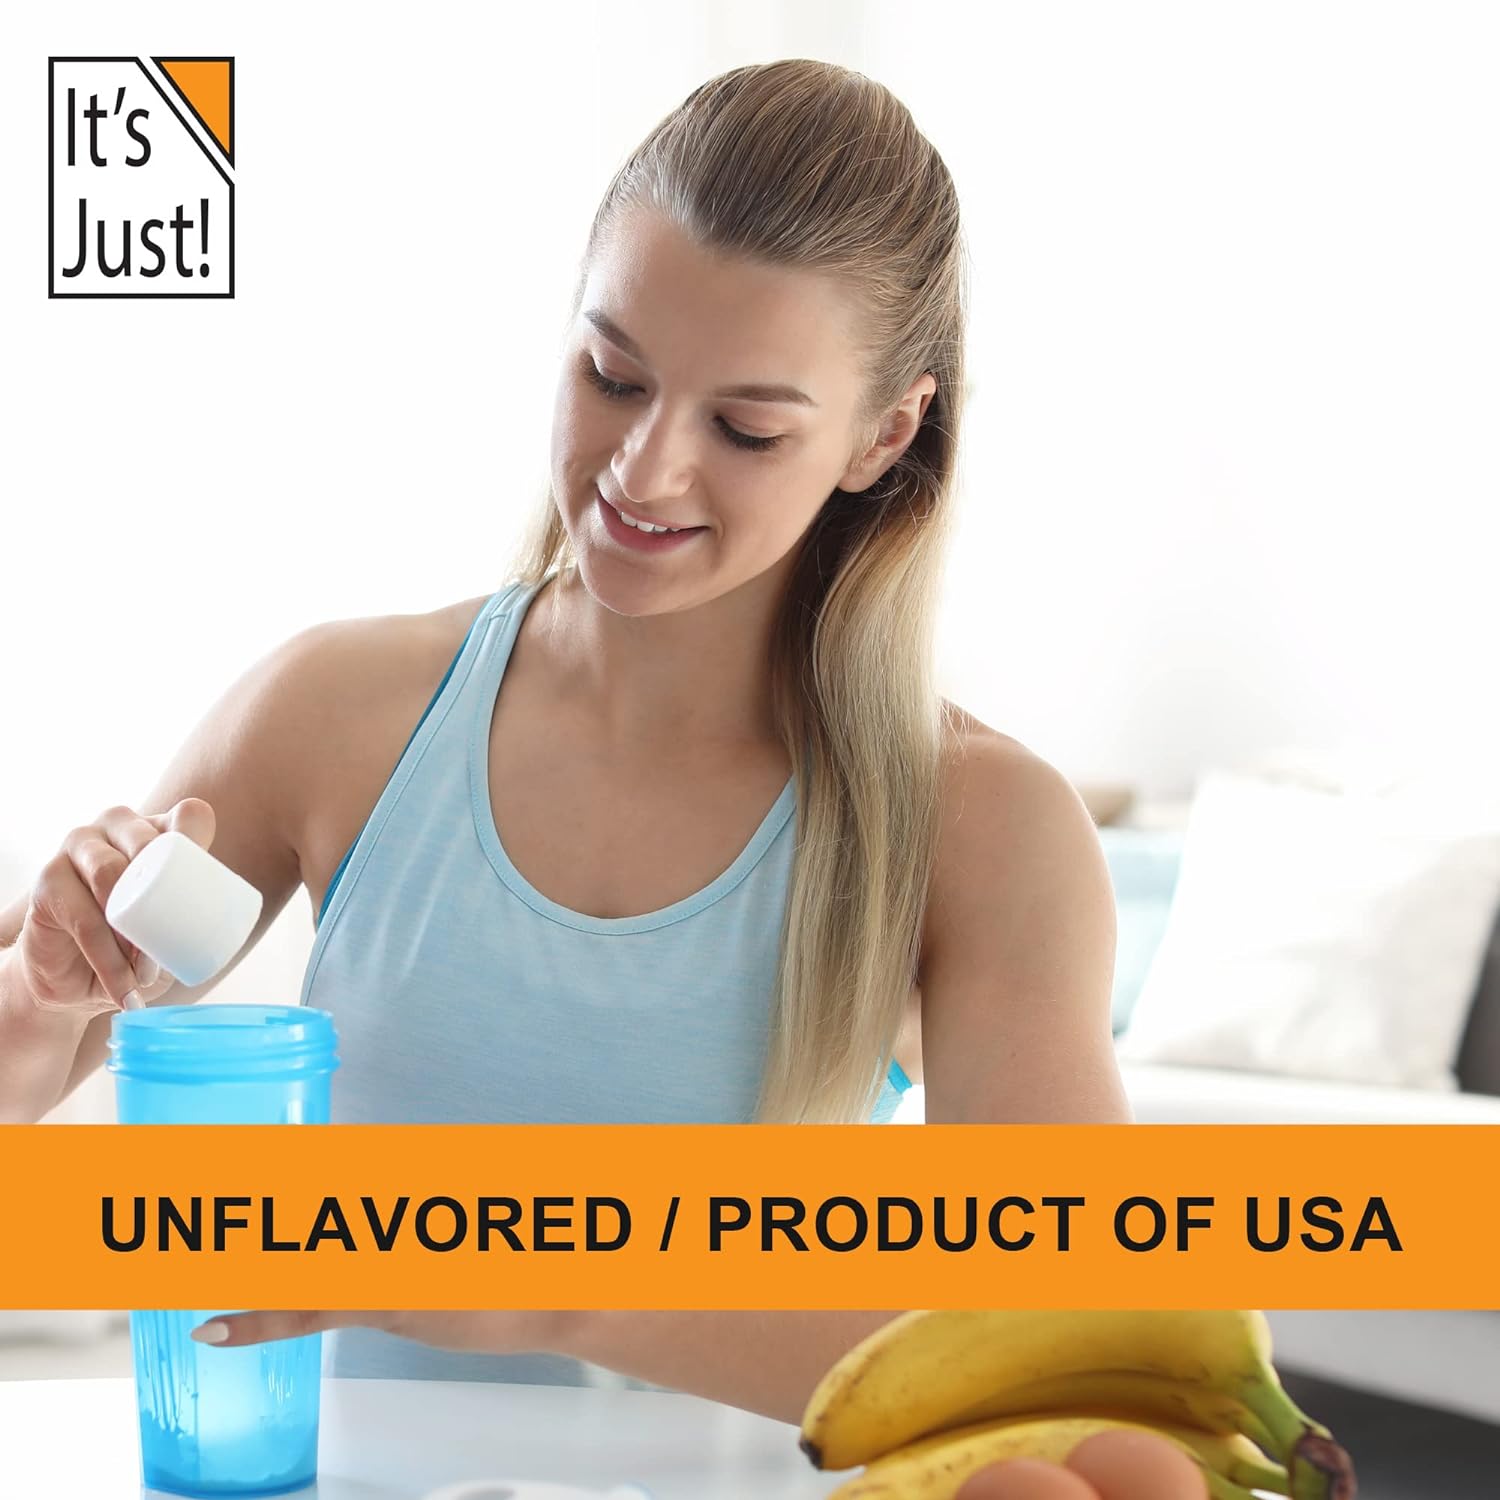 It's Just! - 100% Whey Protein Concentrate, Made in USA, Premium WPC-8